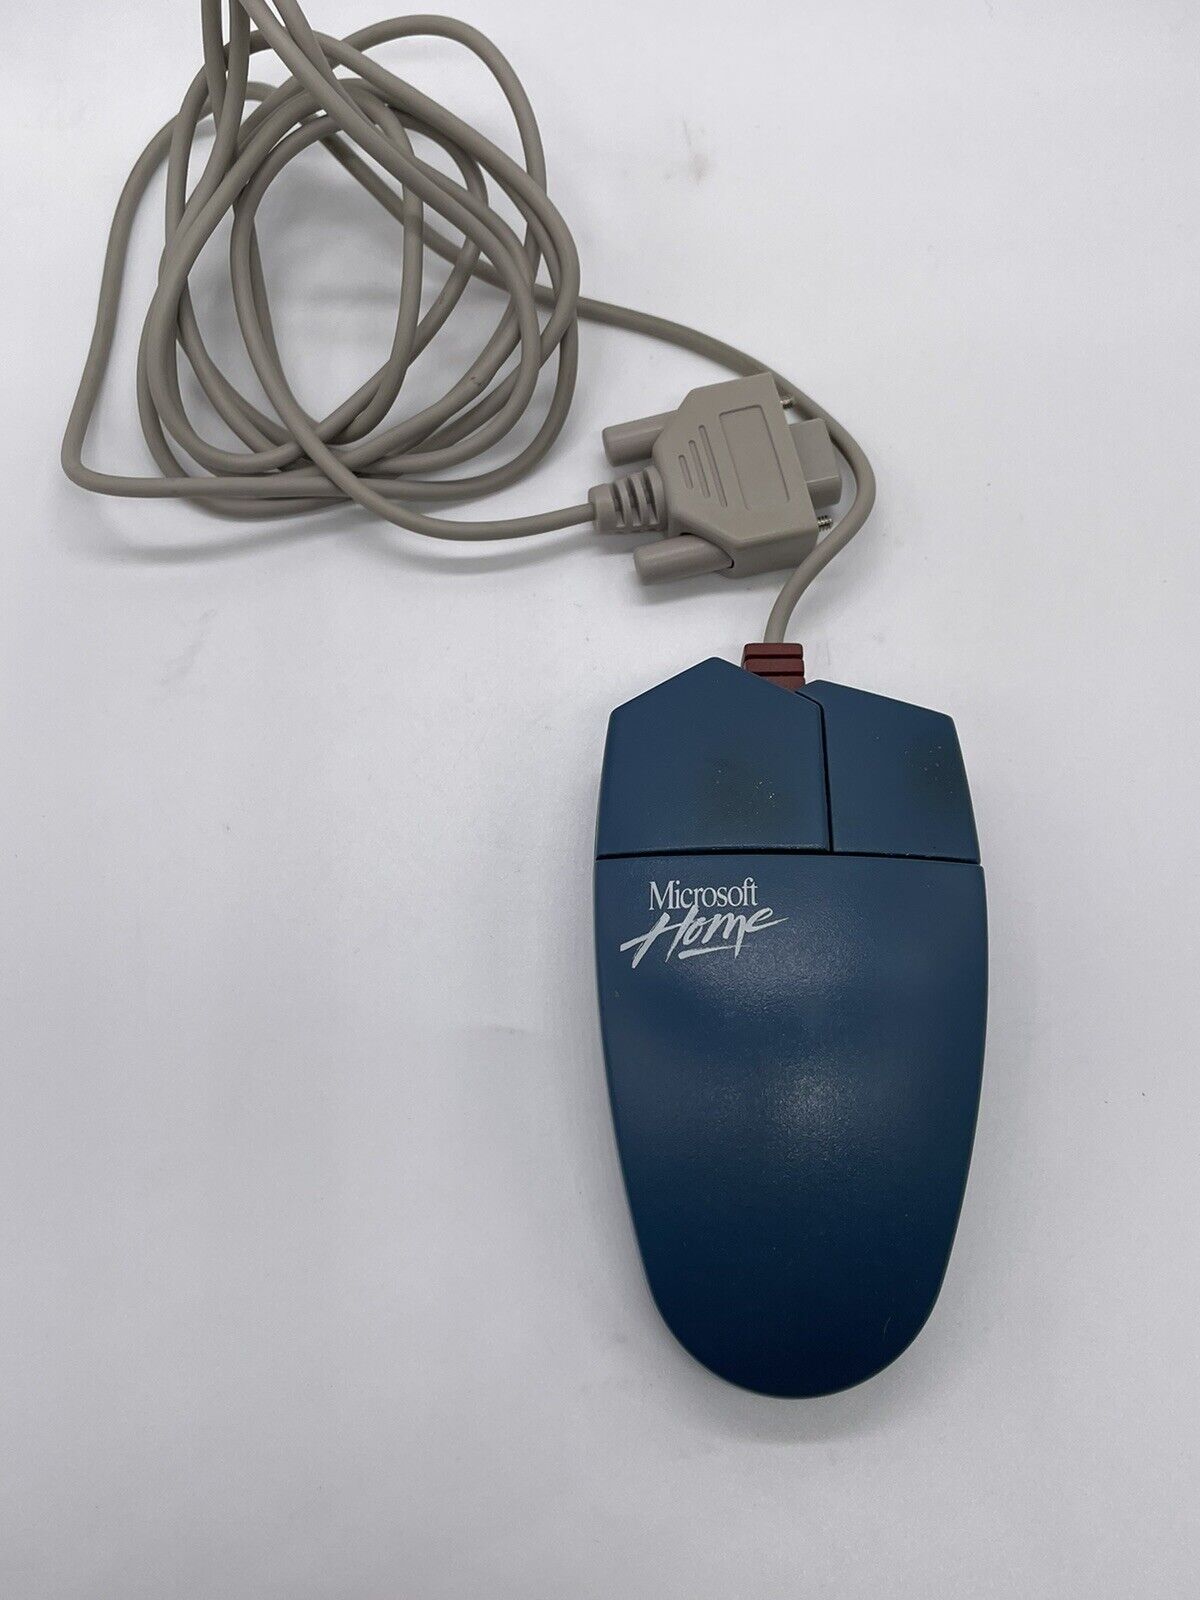 Vintage Microsoft Home Mouse Serial Mouse 9 Pin Blue